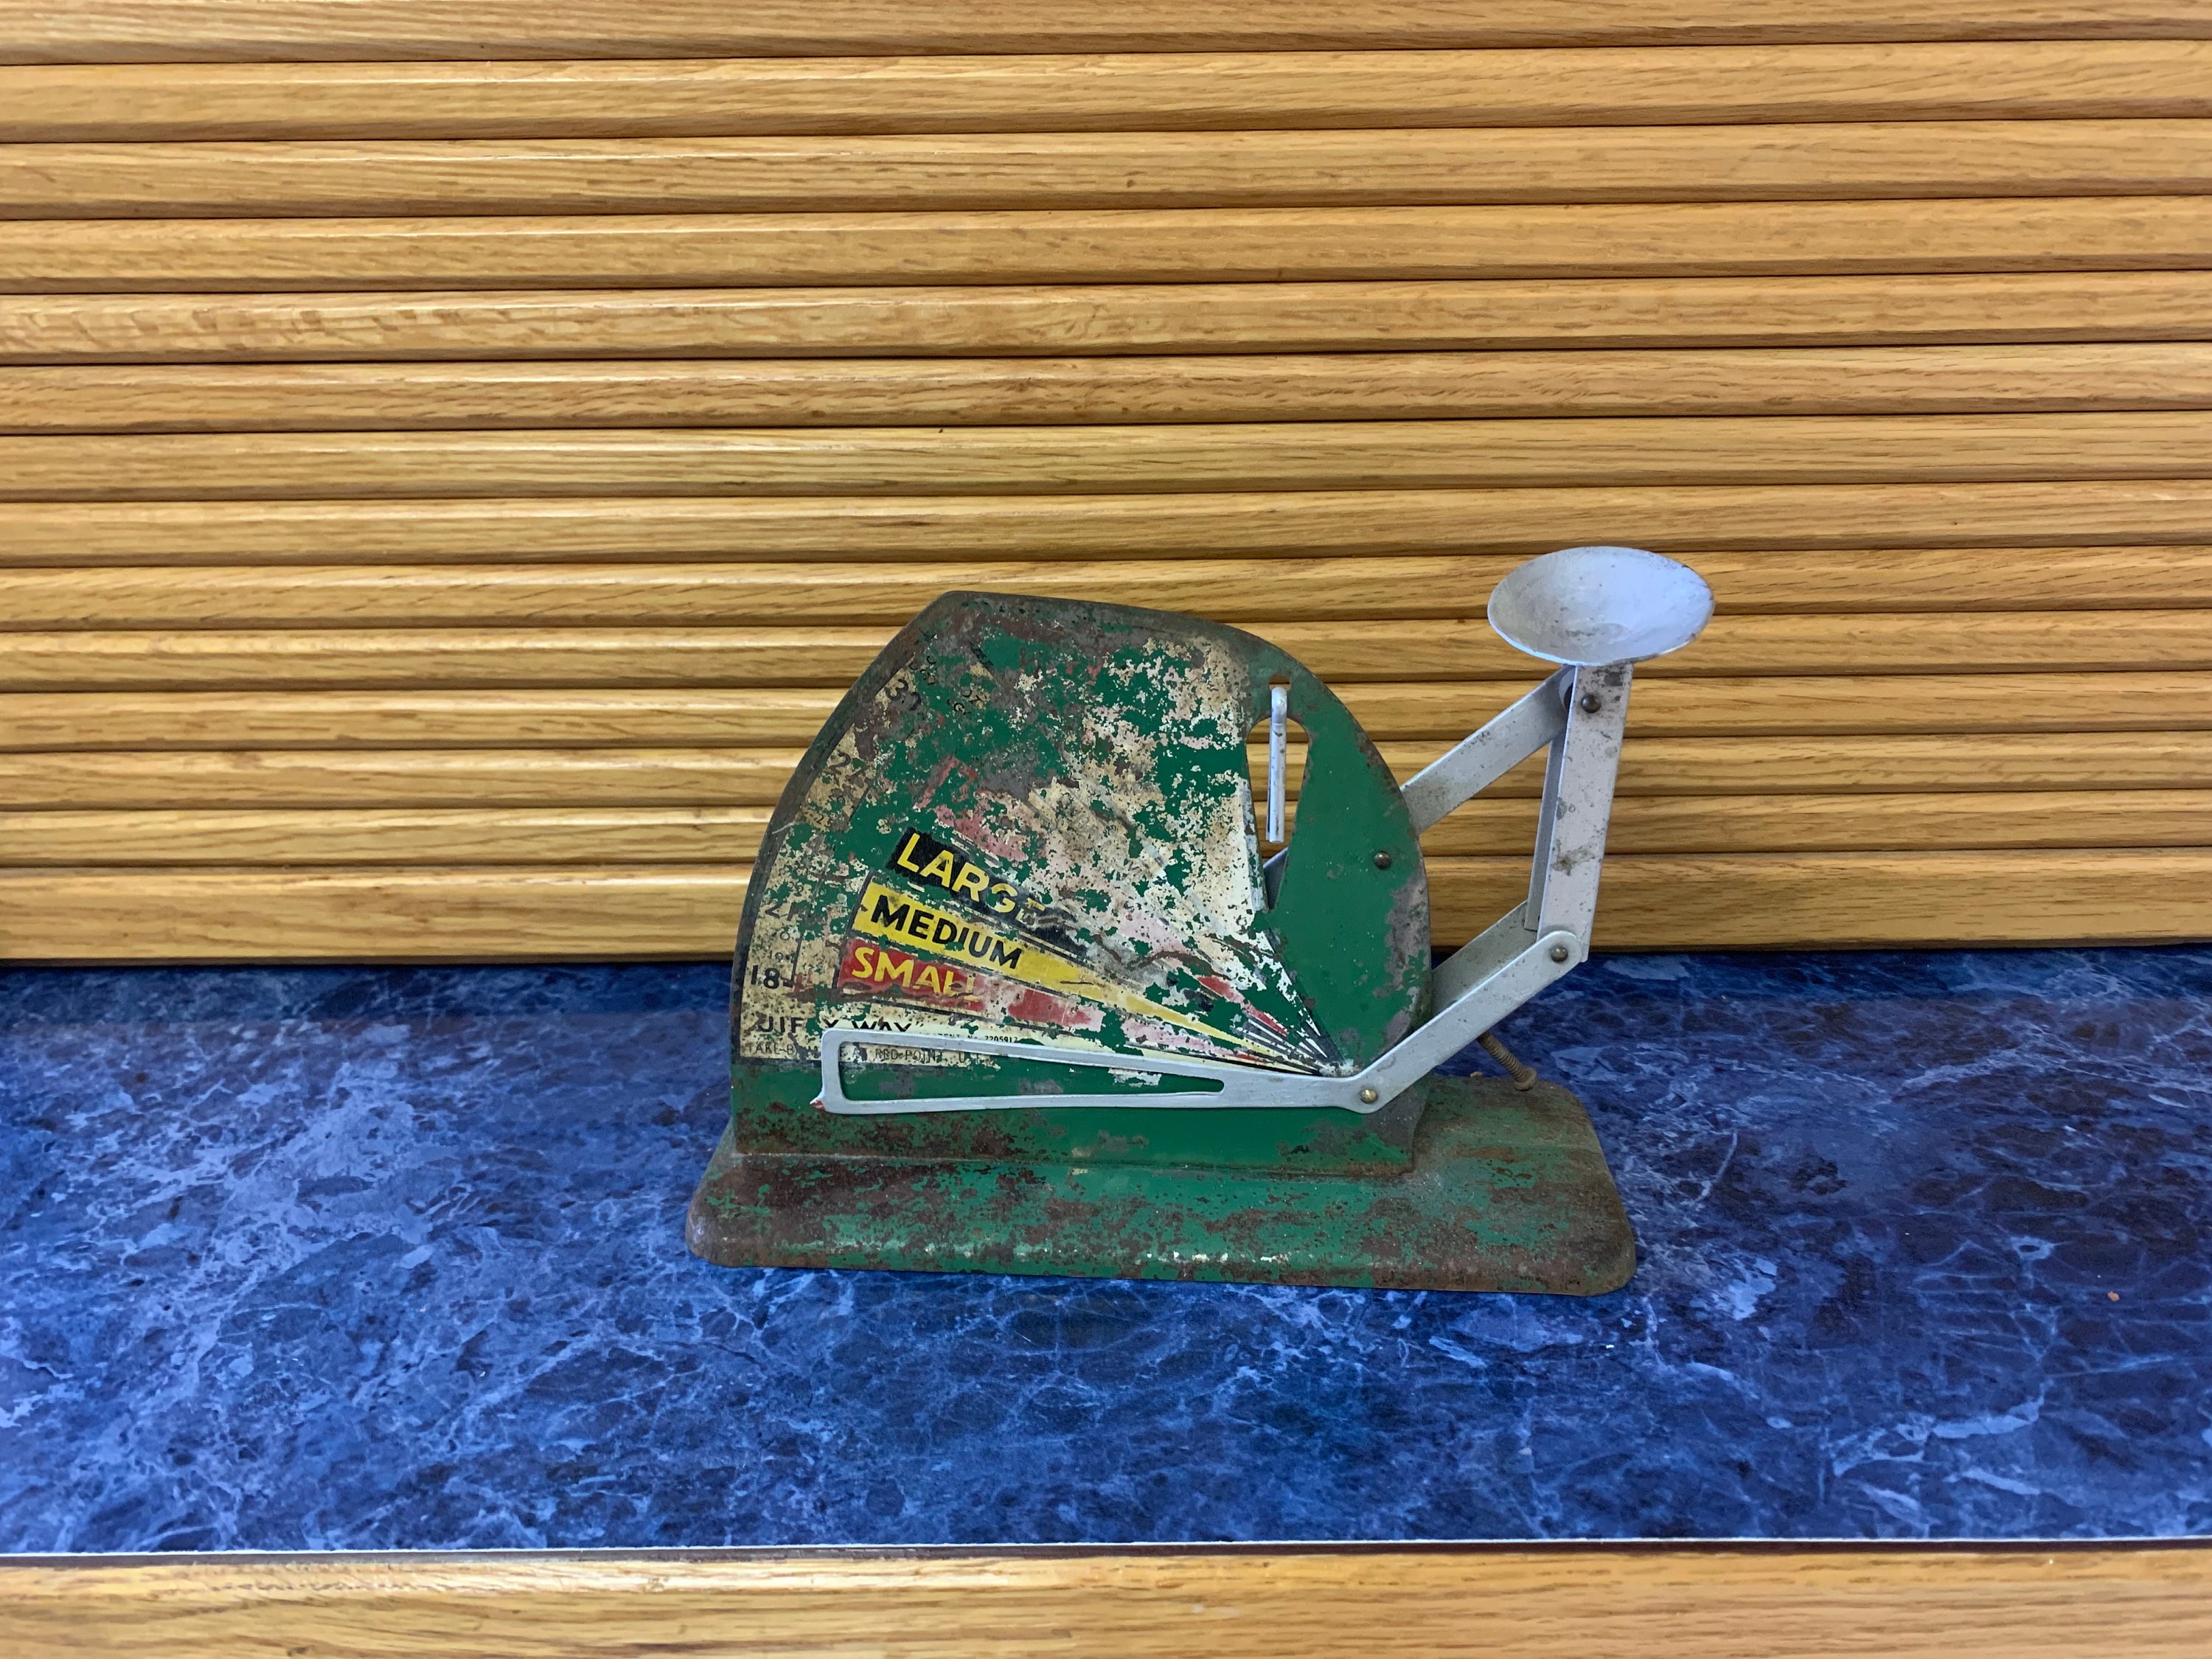 Sold at Auction: Vintage Jiffy-Way Metal Egg Scale Owatonna, Minnesota,  Green, Near Mint Condition